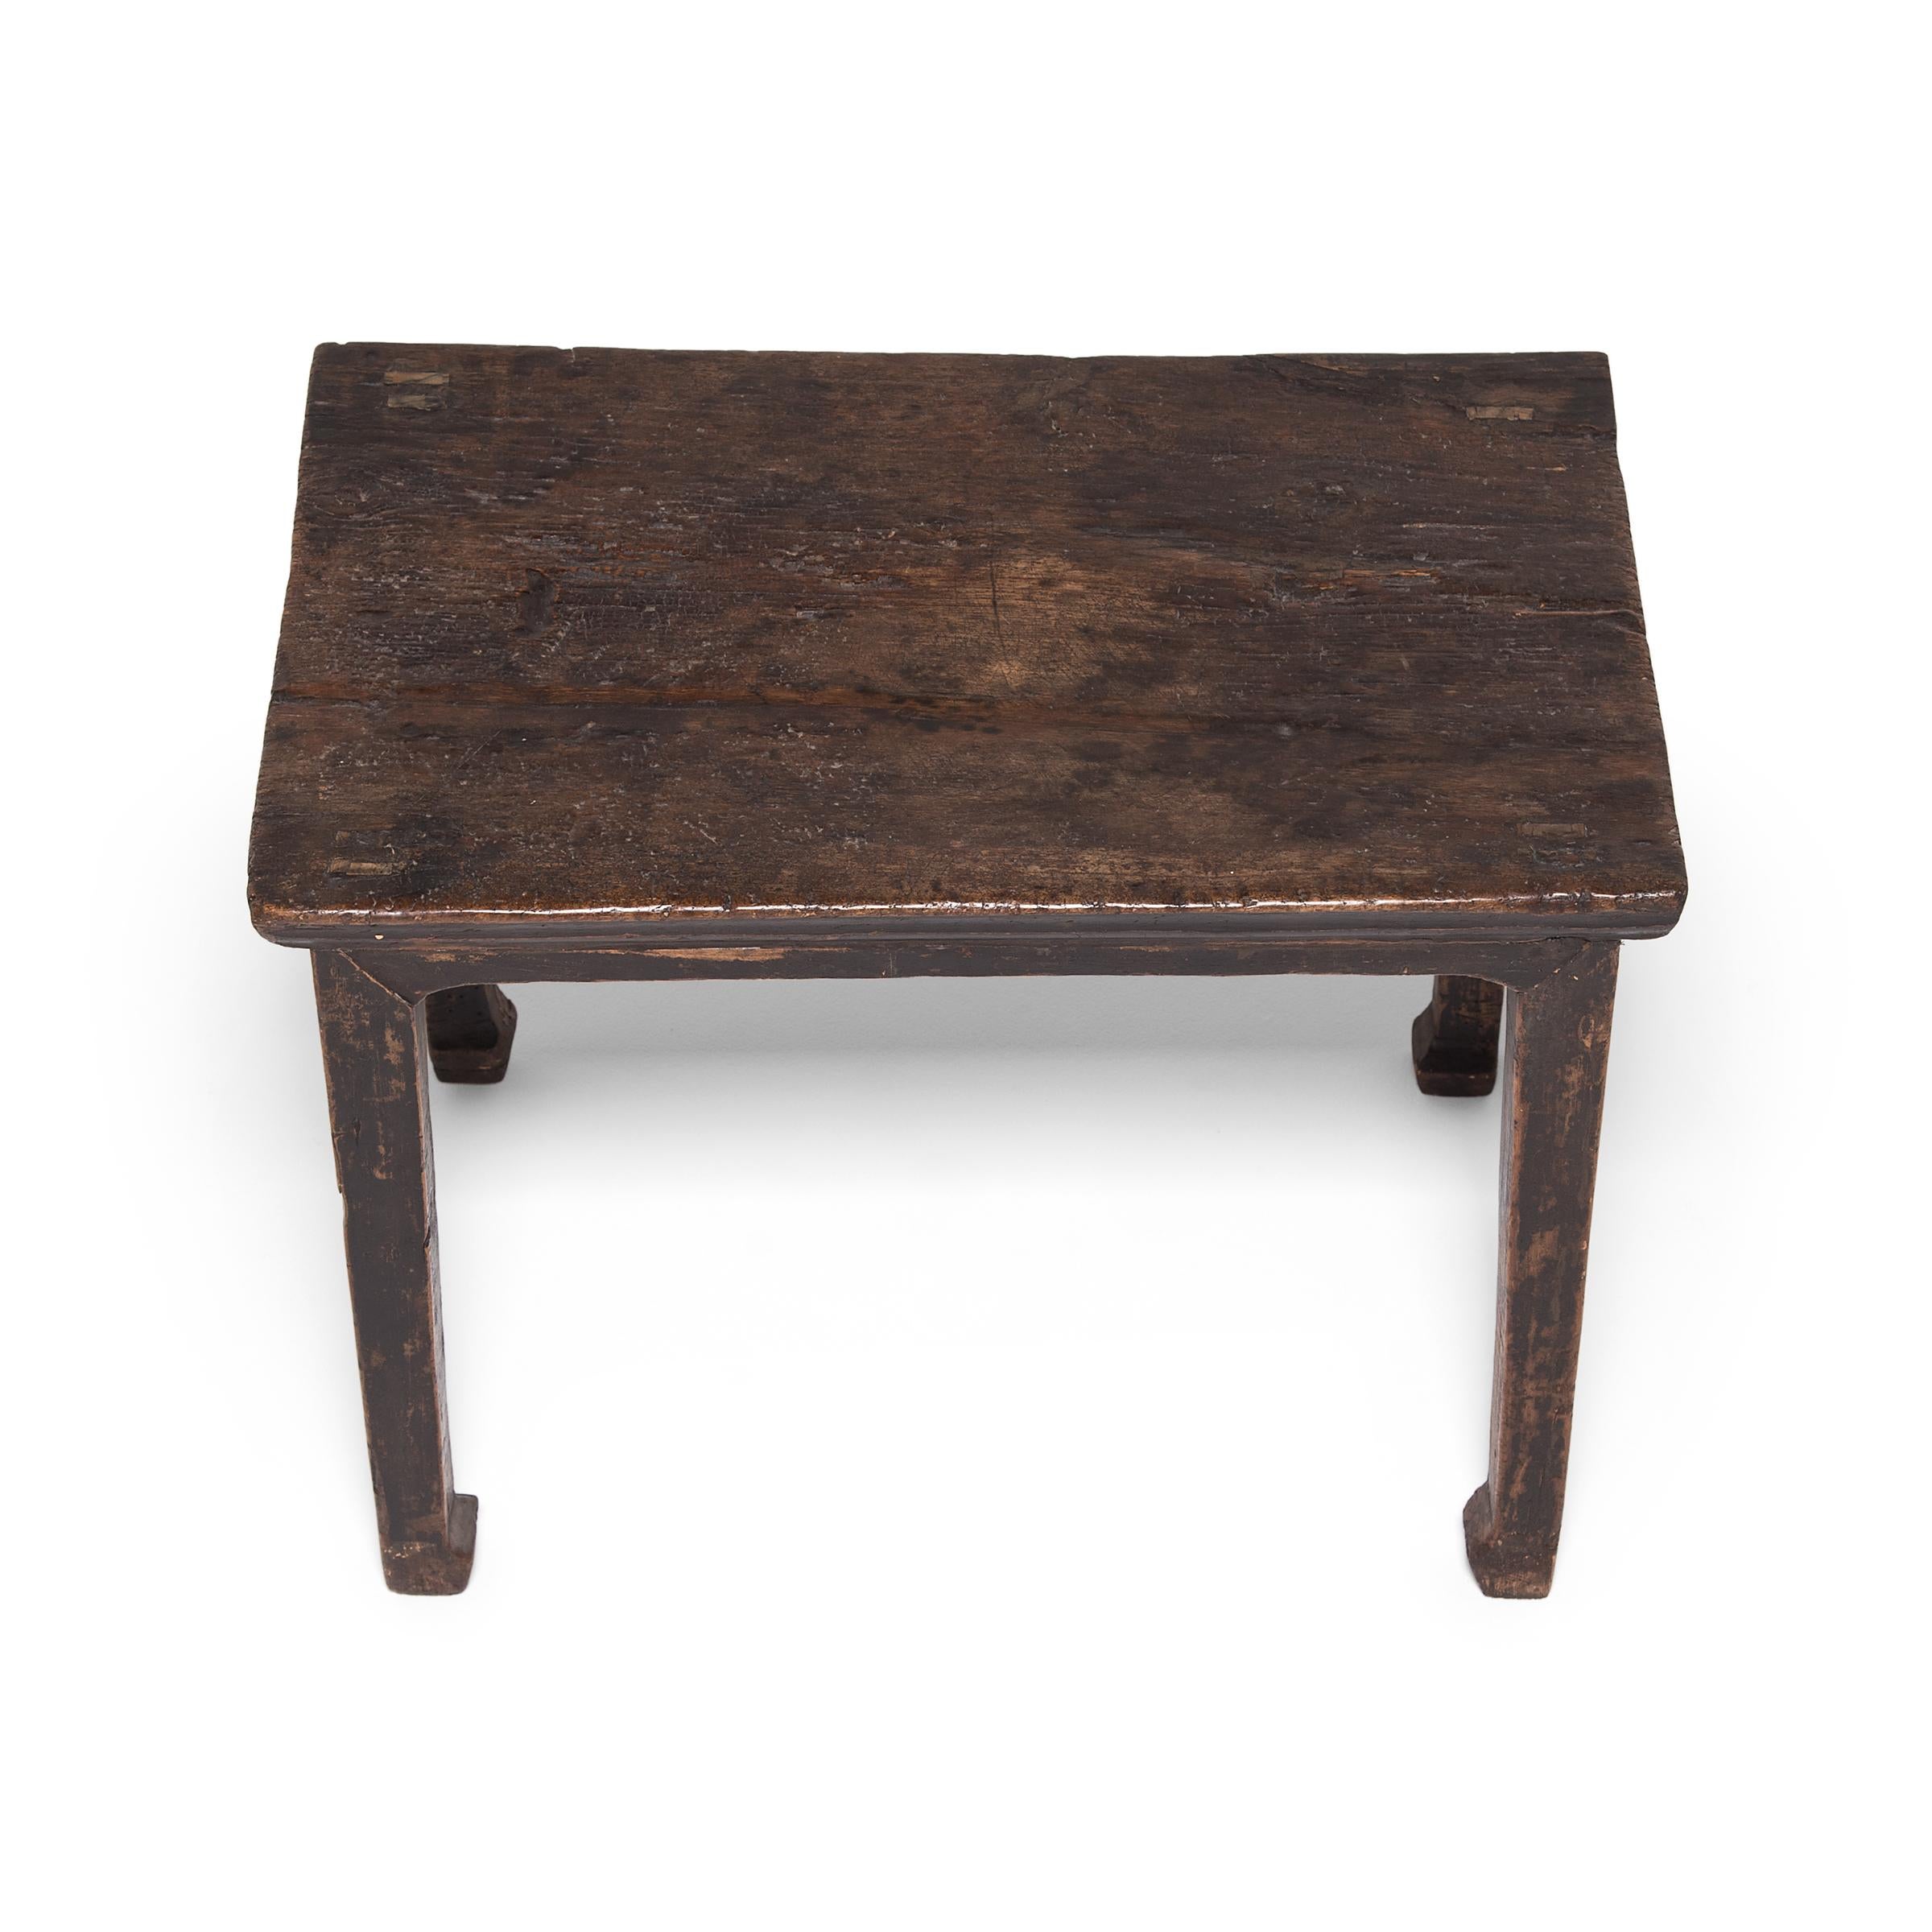 Chinese Hoofed Foot Side Table, c. 1700 In Good Condition For Sale In Chicago, IL